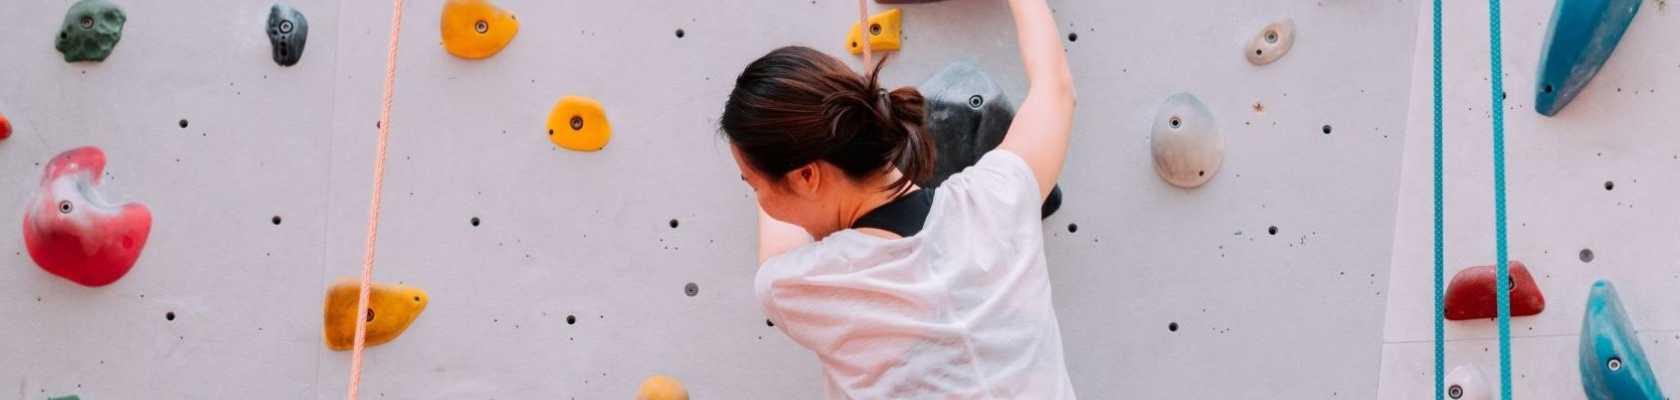 image of woman on climbing wall illustrating one type of risk management